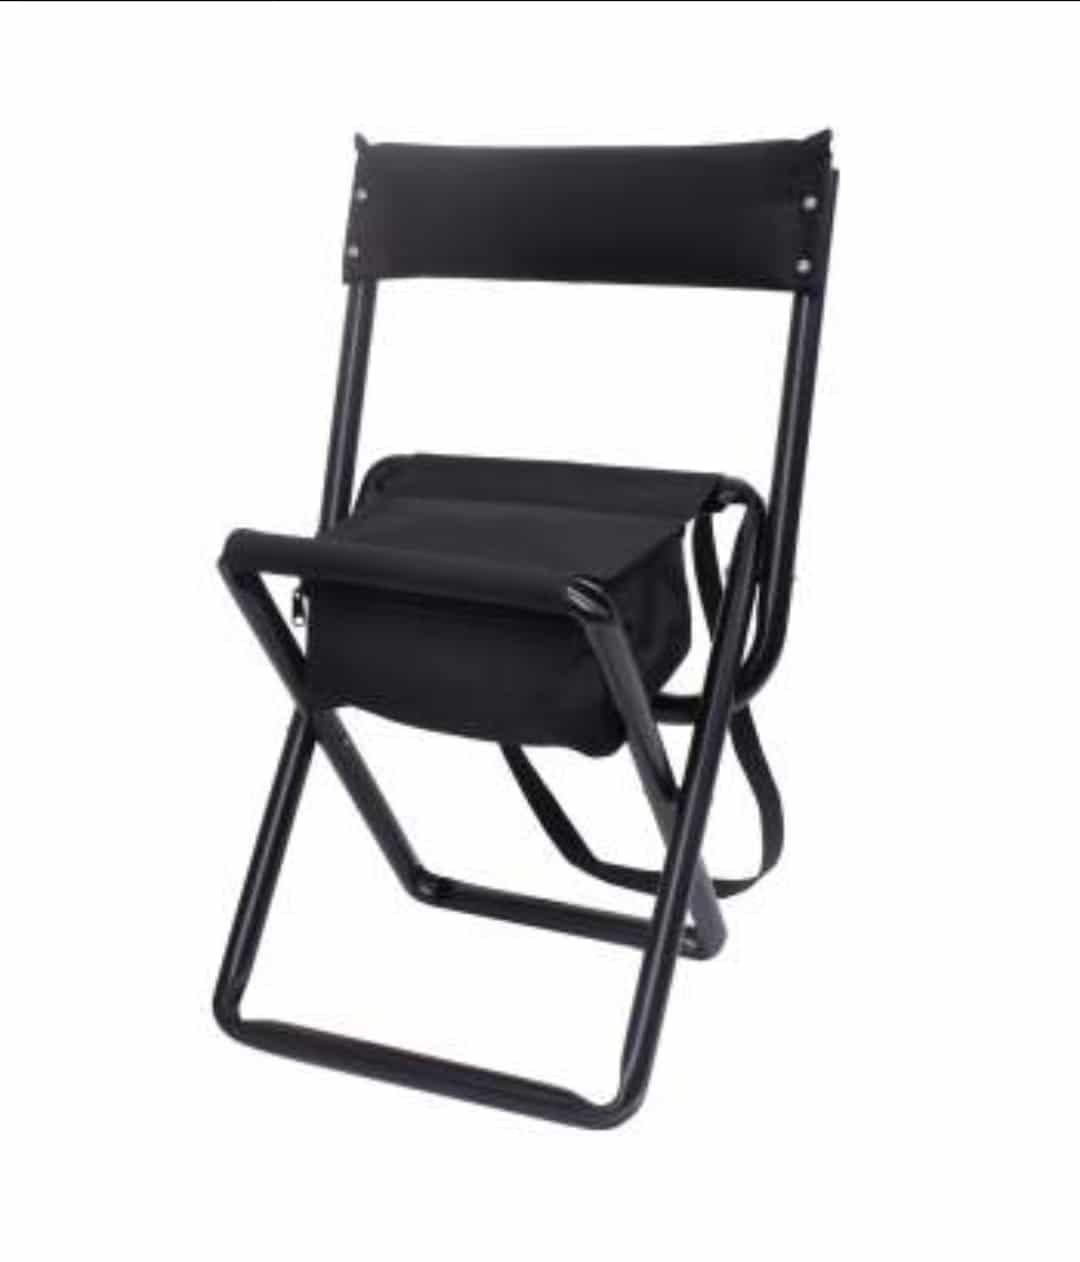 deluxe camping chair